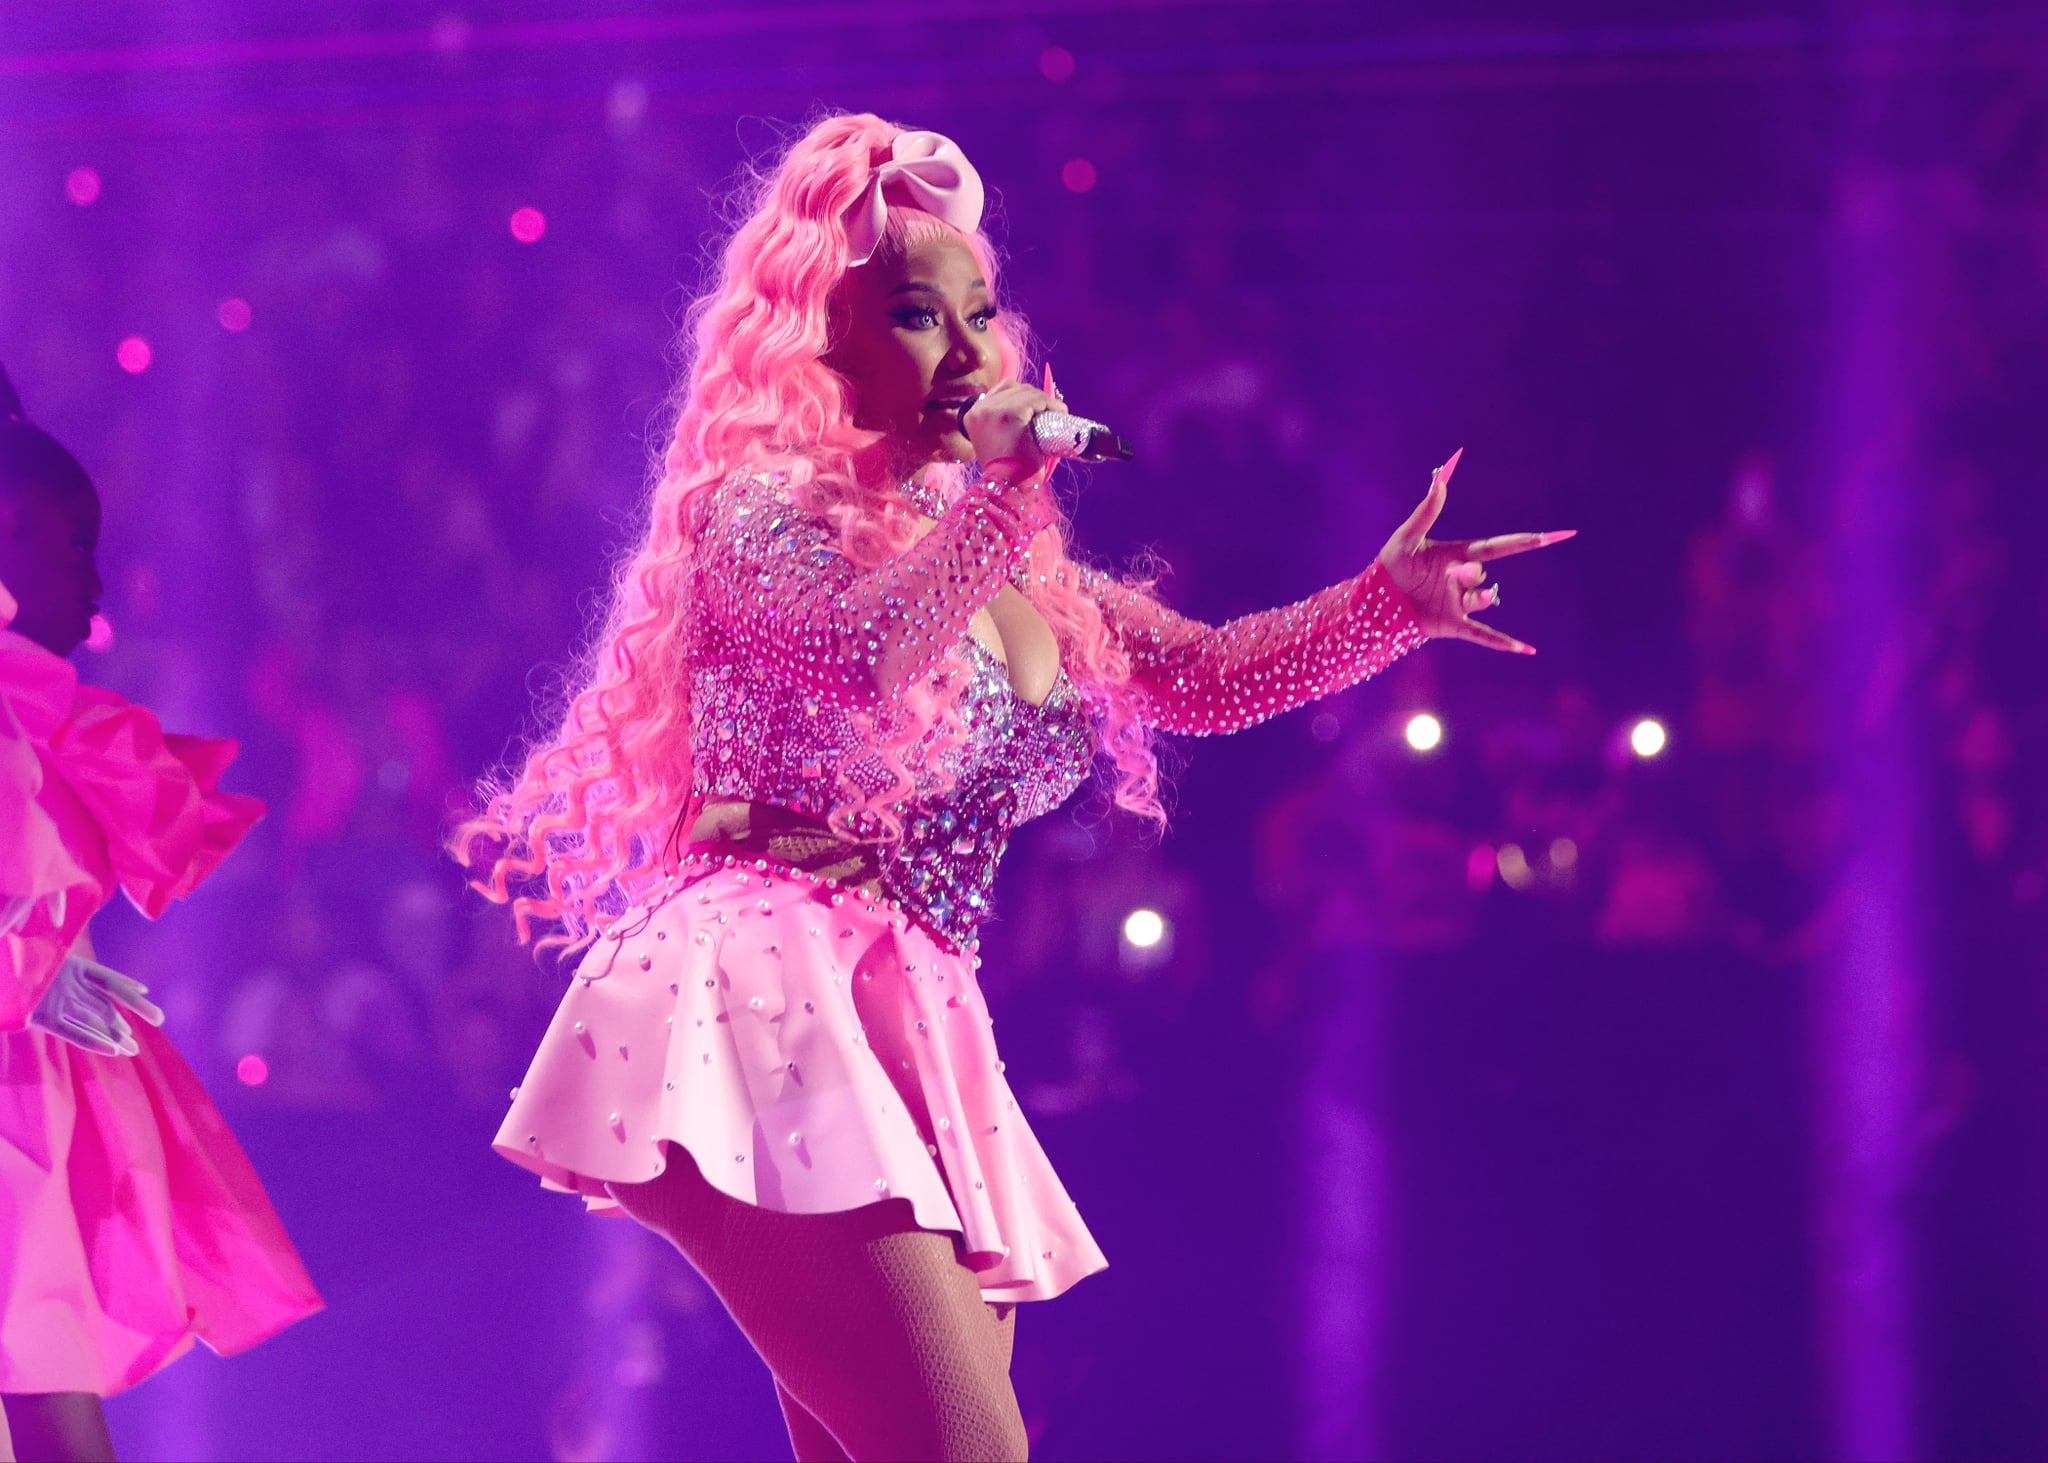 Nicki Minaj onstage during the 2022 MTV Video Music Awards at Prudential Center in Newark, New Jersey. (Photo by Christopher Polk/Variety via Getty Images)